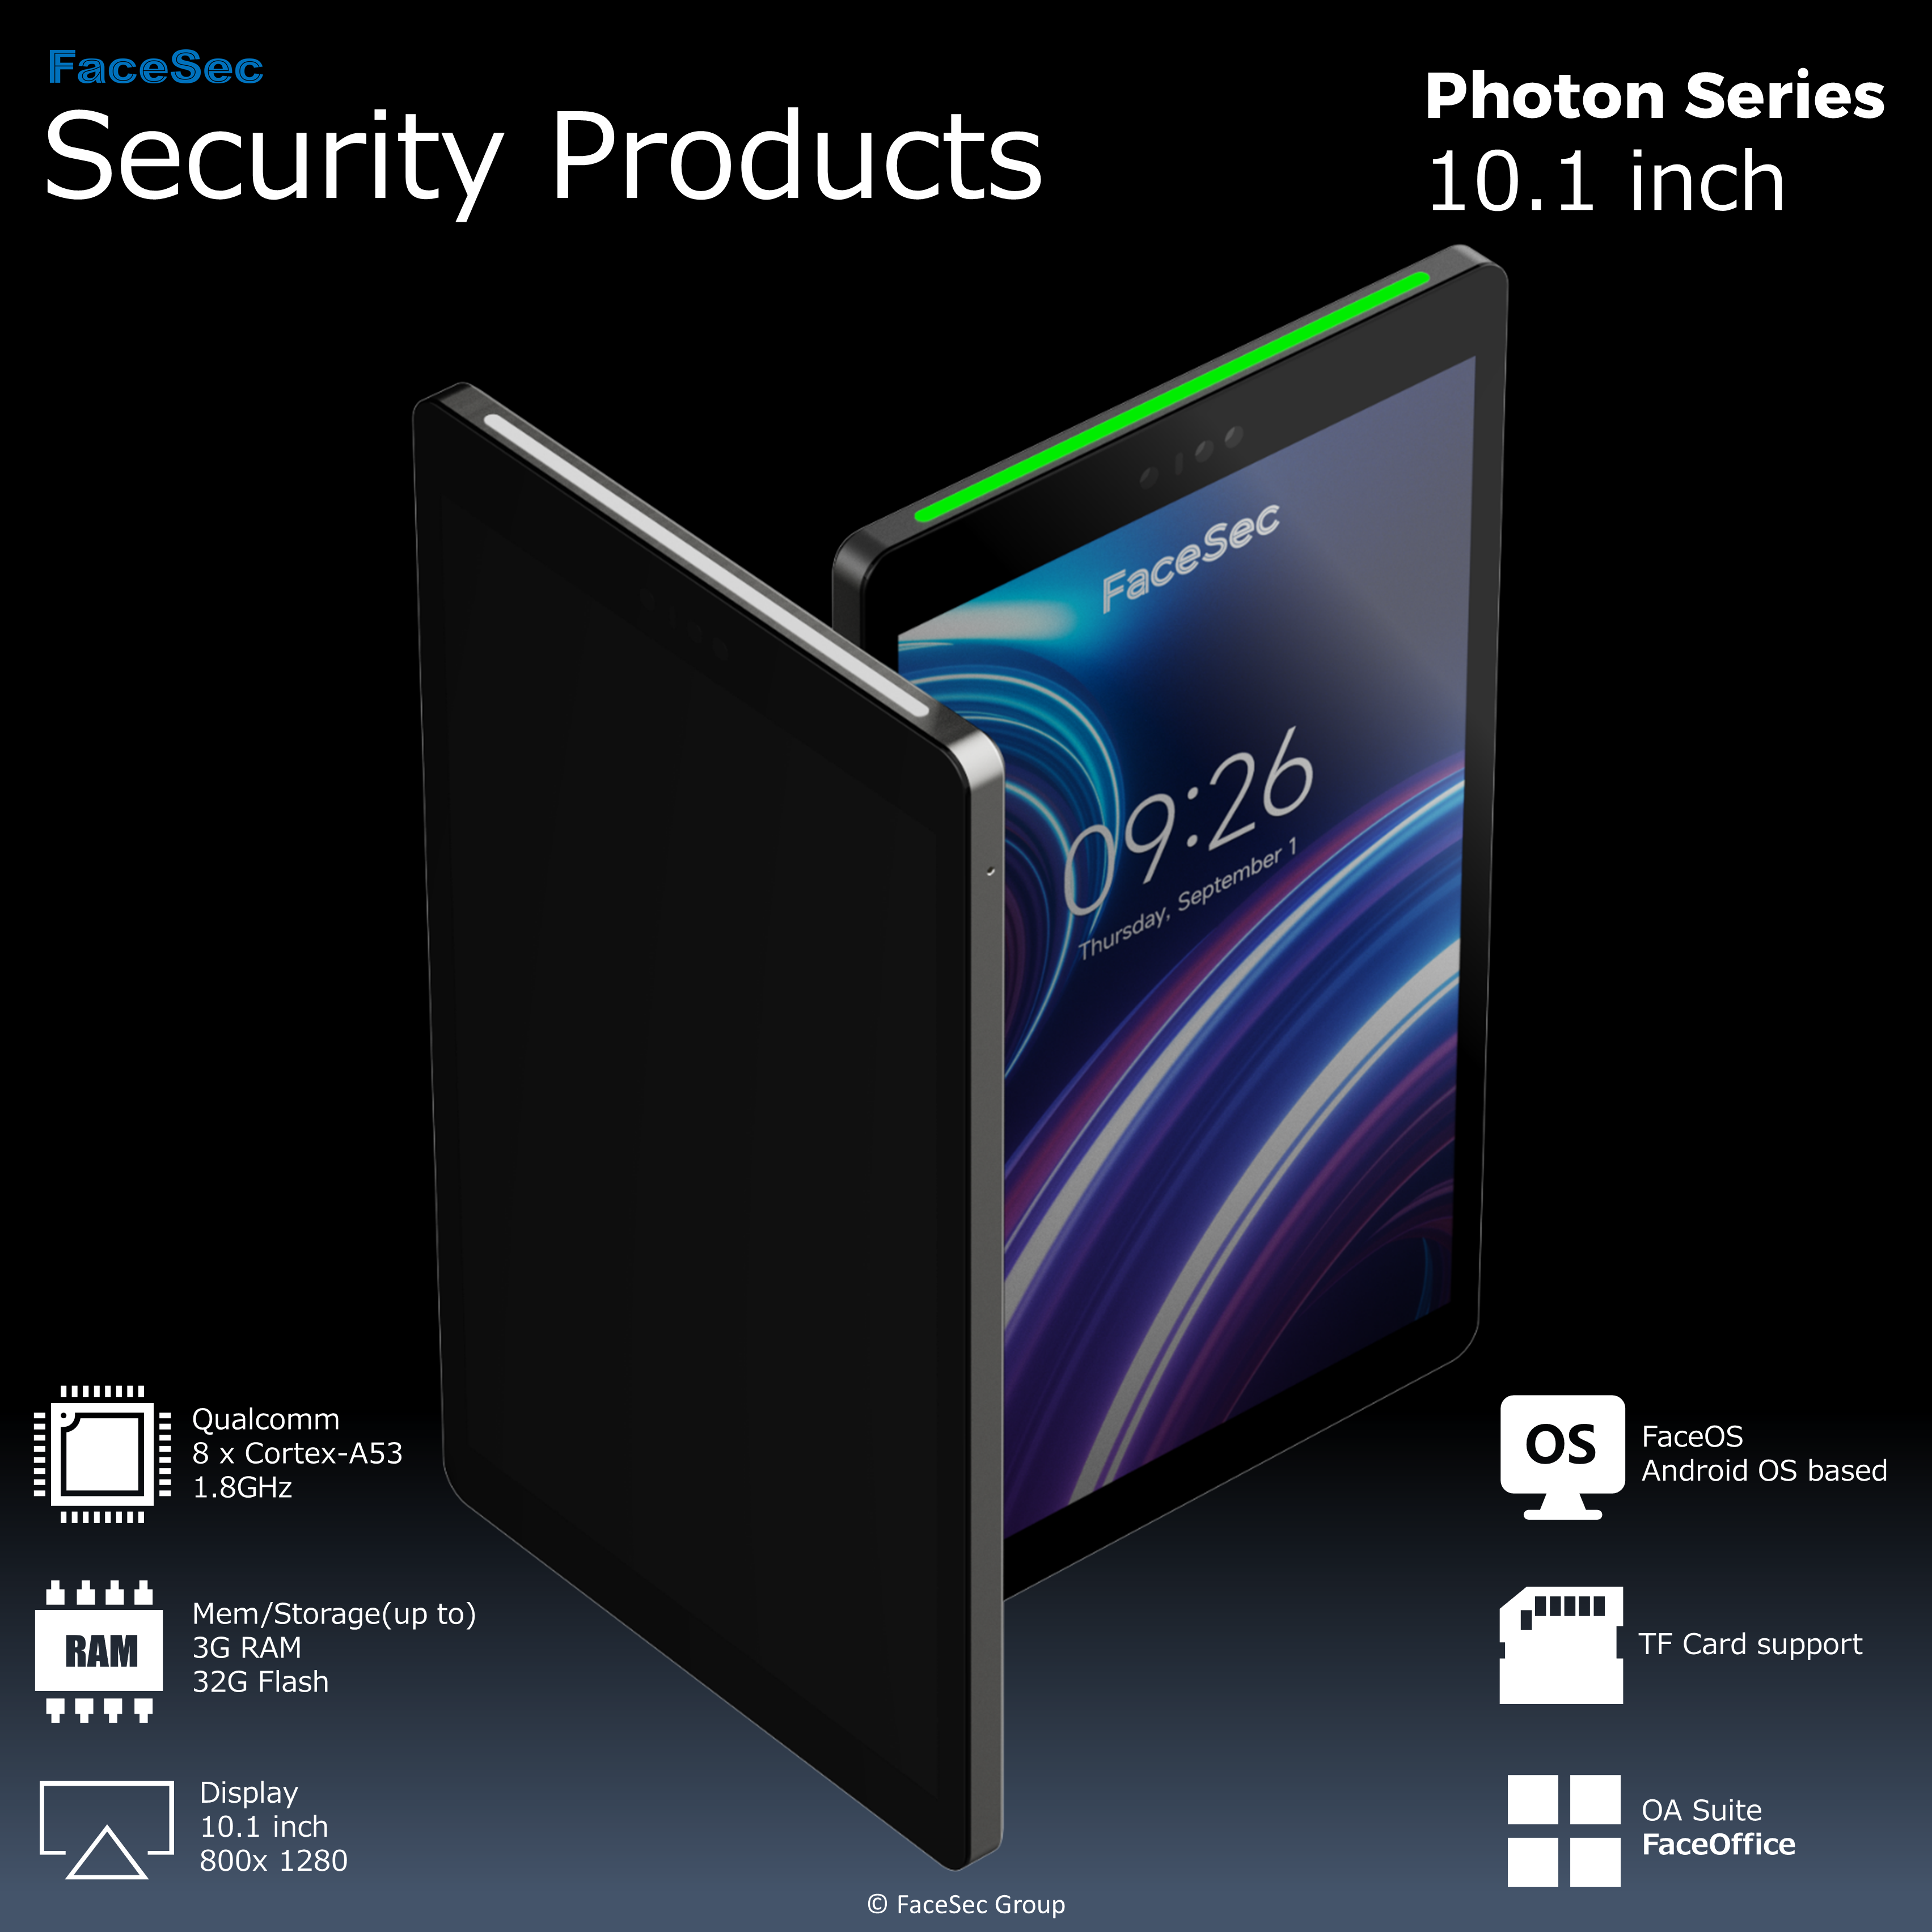 Photon series 10.1 inch(Security Products)